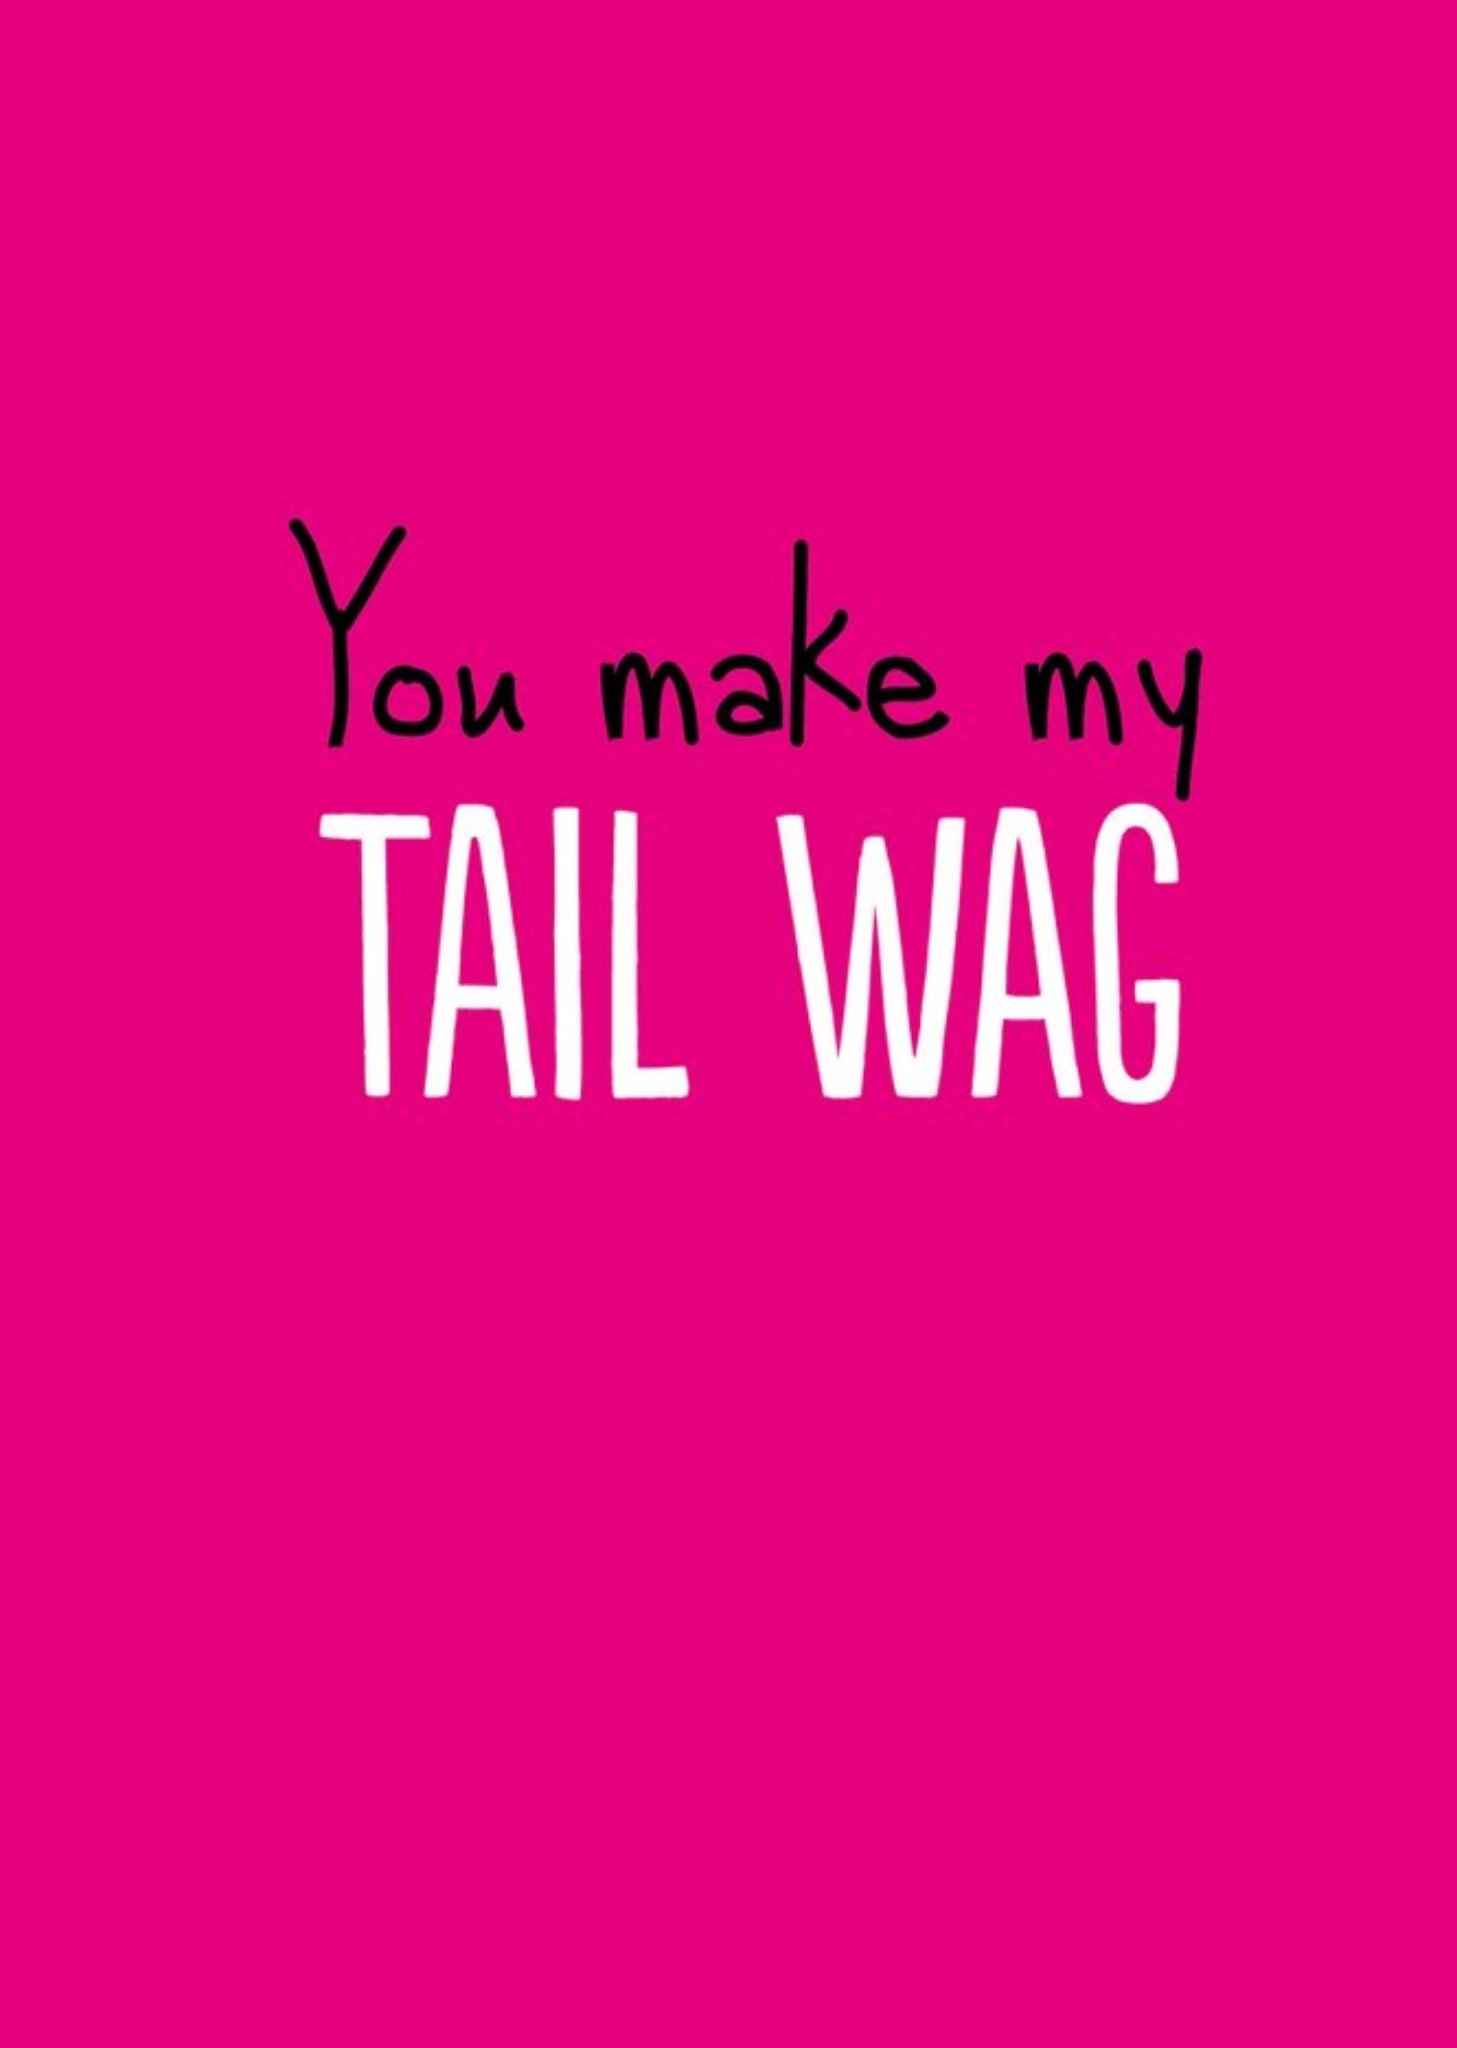 Moonpig Humourous Typography On A Vibrant Pink Background Valentines Day Card Ecard